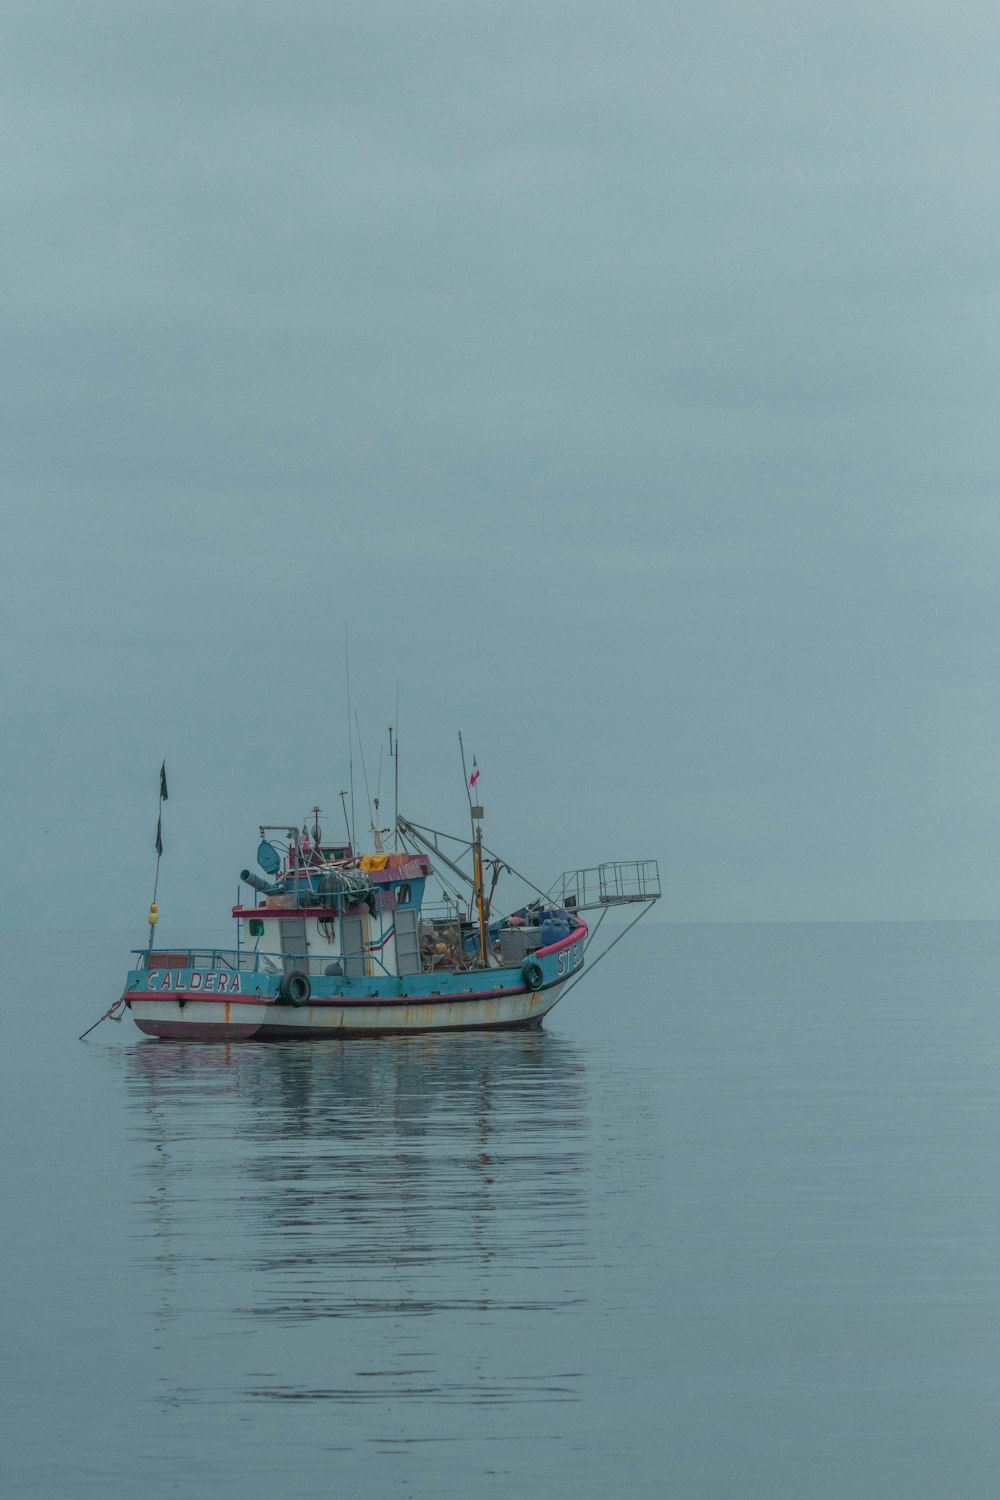 a fishing boat in the middle of the ocean